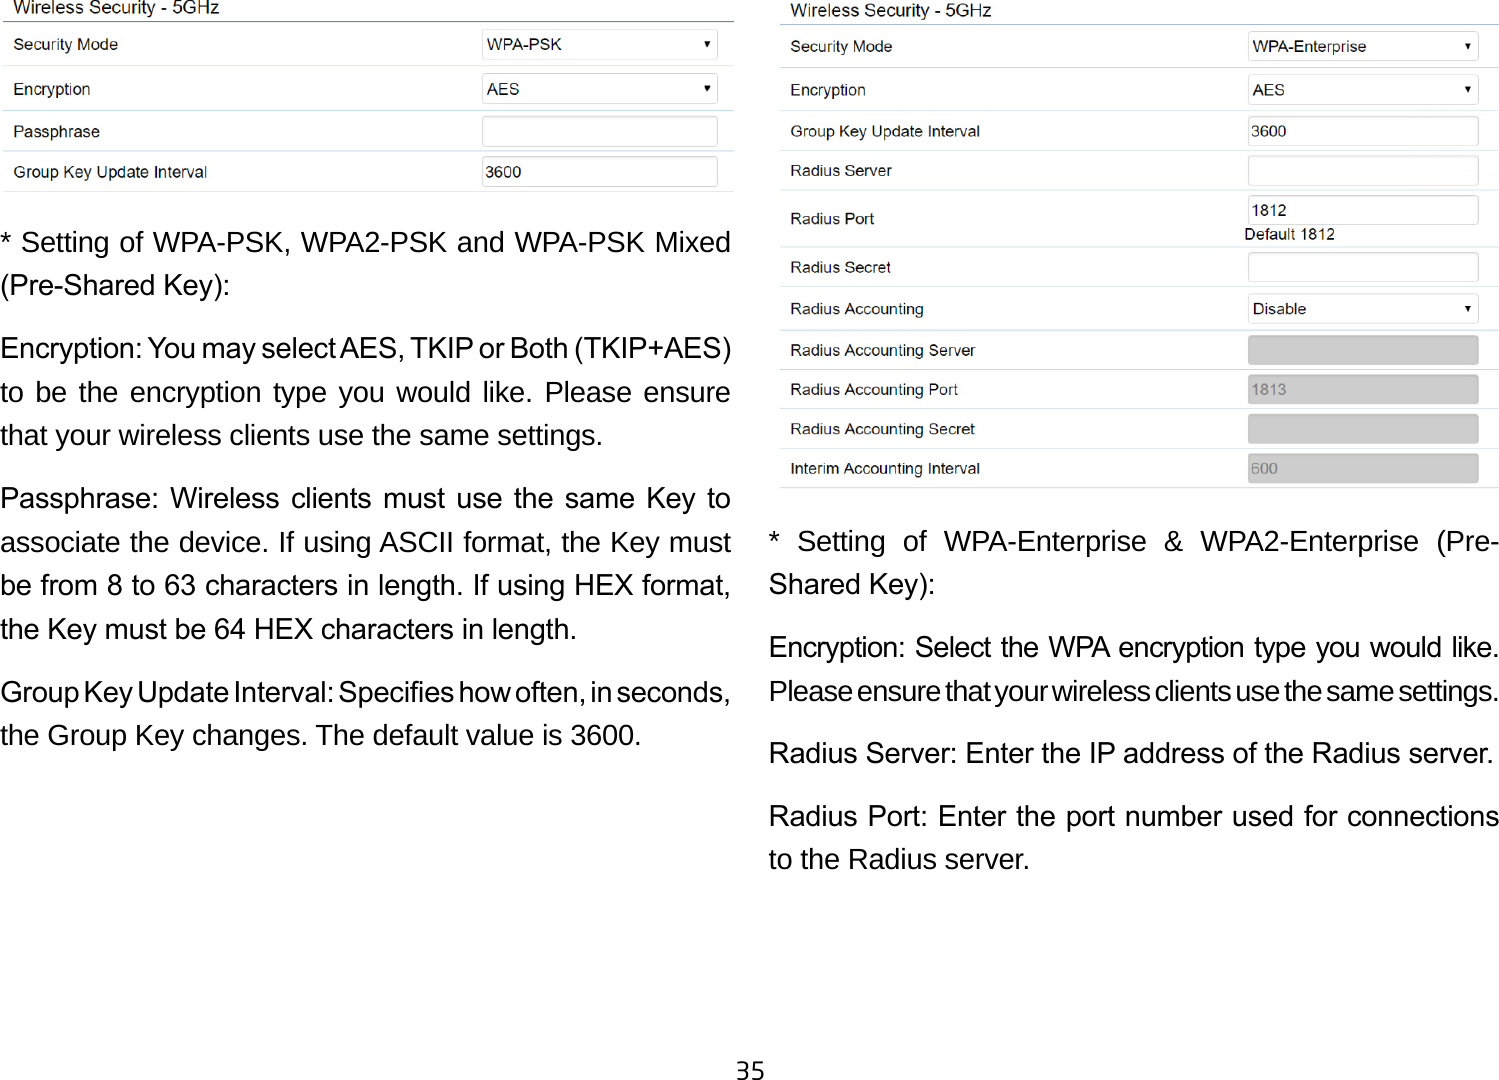 35* Setting of WPA-PSK, WPA2-PSK and WPA-PSK Mixed (Pre-Shared Key):Encryption: You may select AES, TKIP or Both (TKIP+AES) to be the encryption type you would like. Please ensure that your wireless clients use the same settings.Passphrase: Wireless  clients  must use the  same  Key to associate the device. If using ASCII format, the Key must be from 8 to 63 characters in length. If using HEX format, the Key must be 64 HEX characters in length.Group Key Update Interval: Species how often, in seconds, the Group Key changes. The default value is 3600.** Setting of WPA-Enterprise &amp; WPA2-Enterprise (Pre-Shared Key):Encryption: Select the WPA encryption type you would like. Please ensure that your wireless clients use the same settings.Radius Server: Enter the IP address of the Radius server.Radius Port: Enter the port number used for connections to the Radius server.